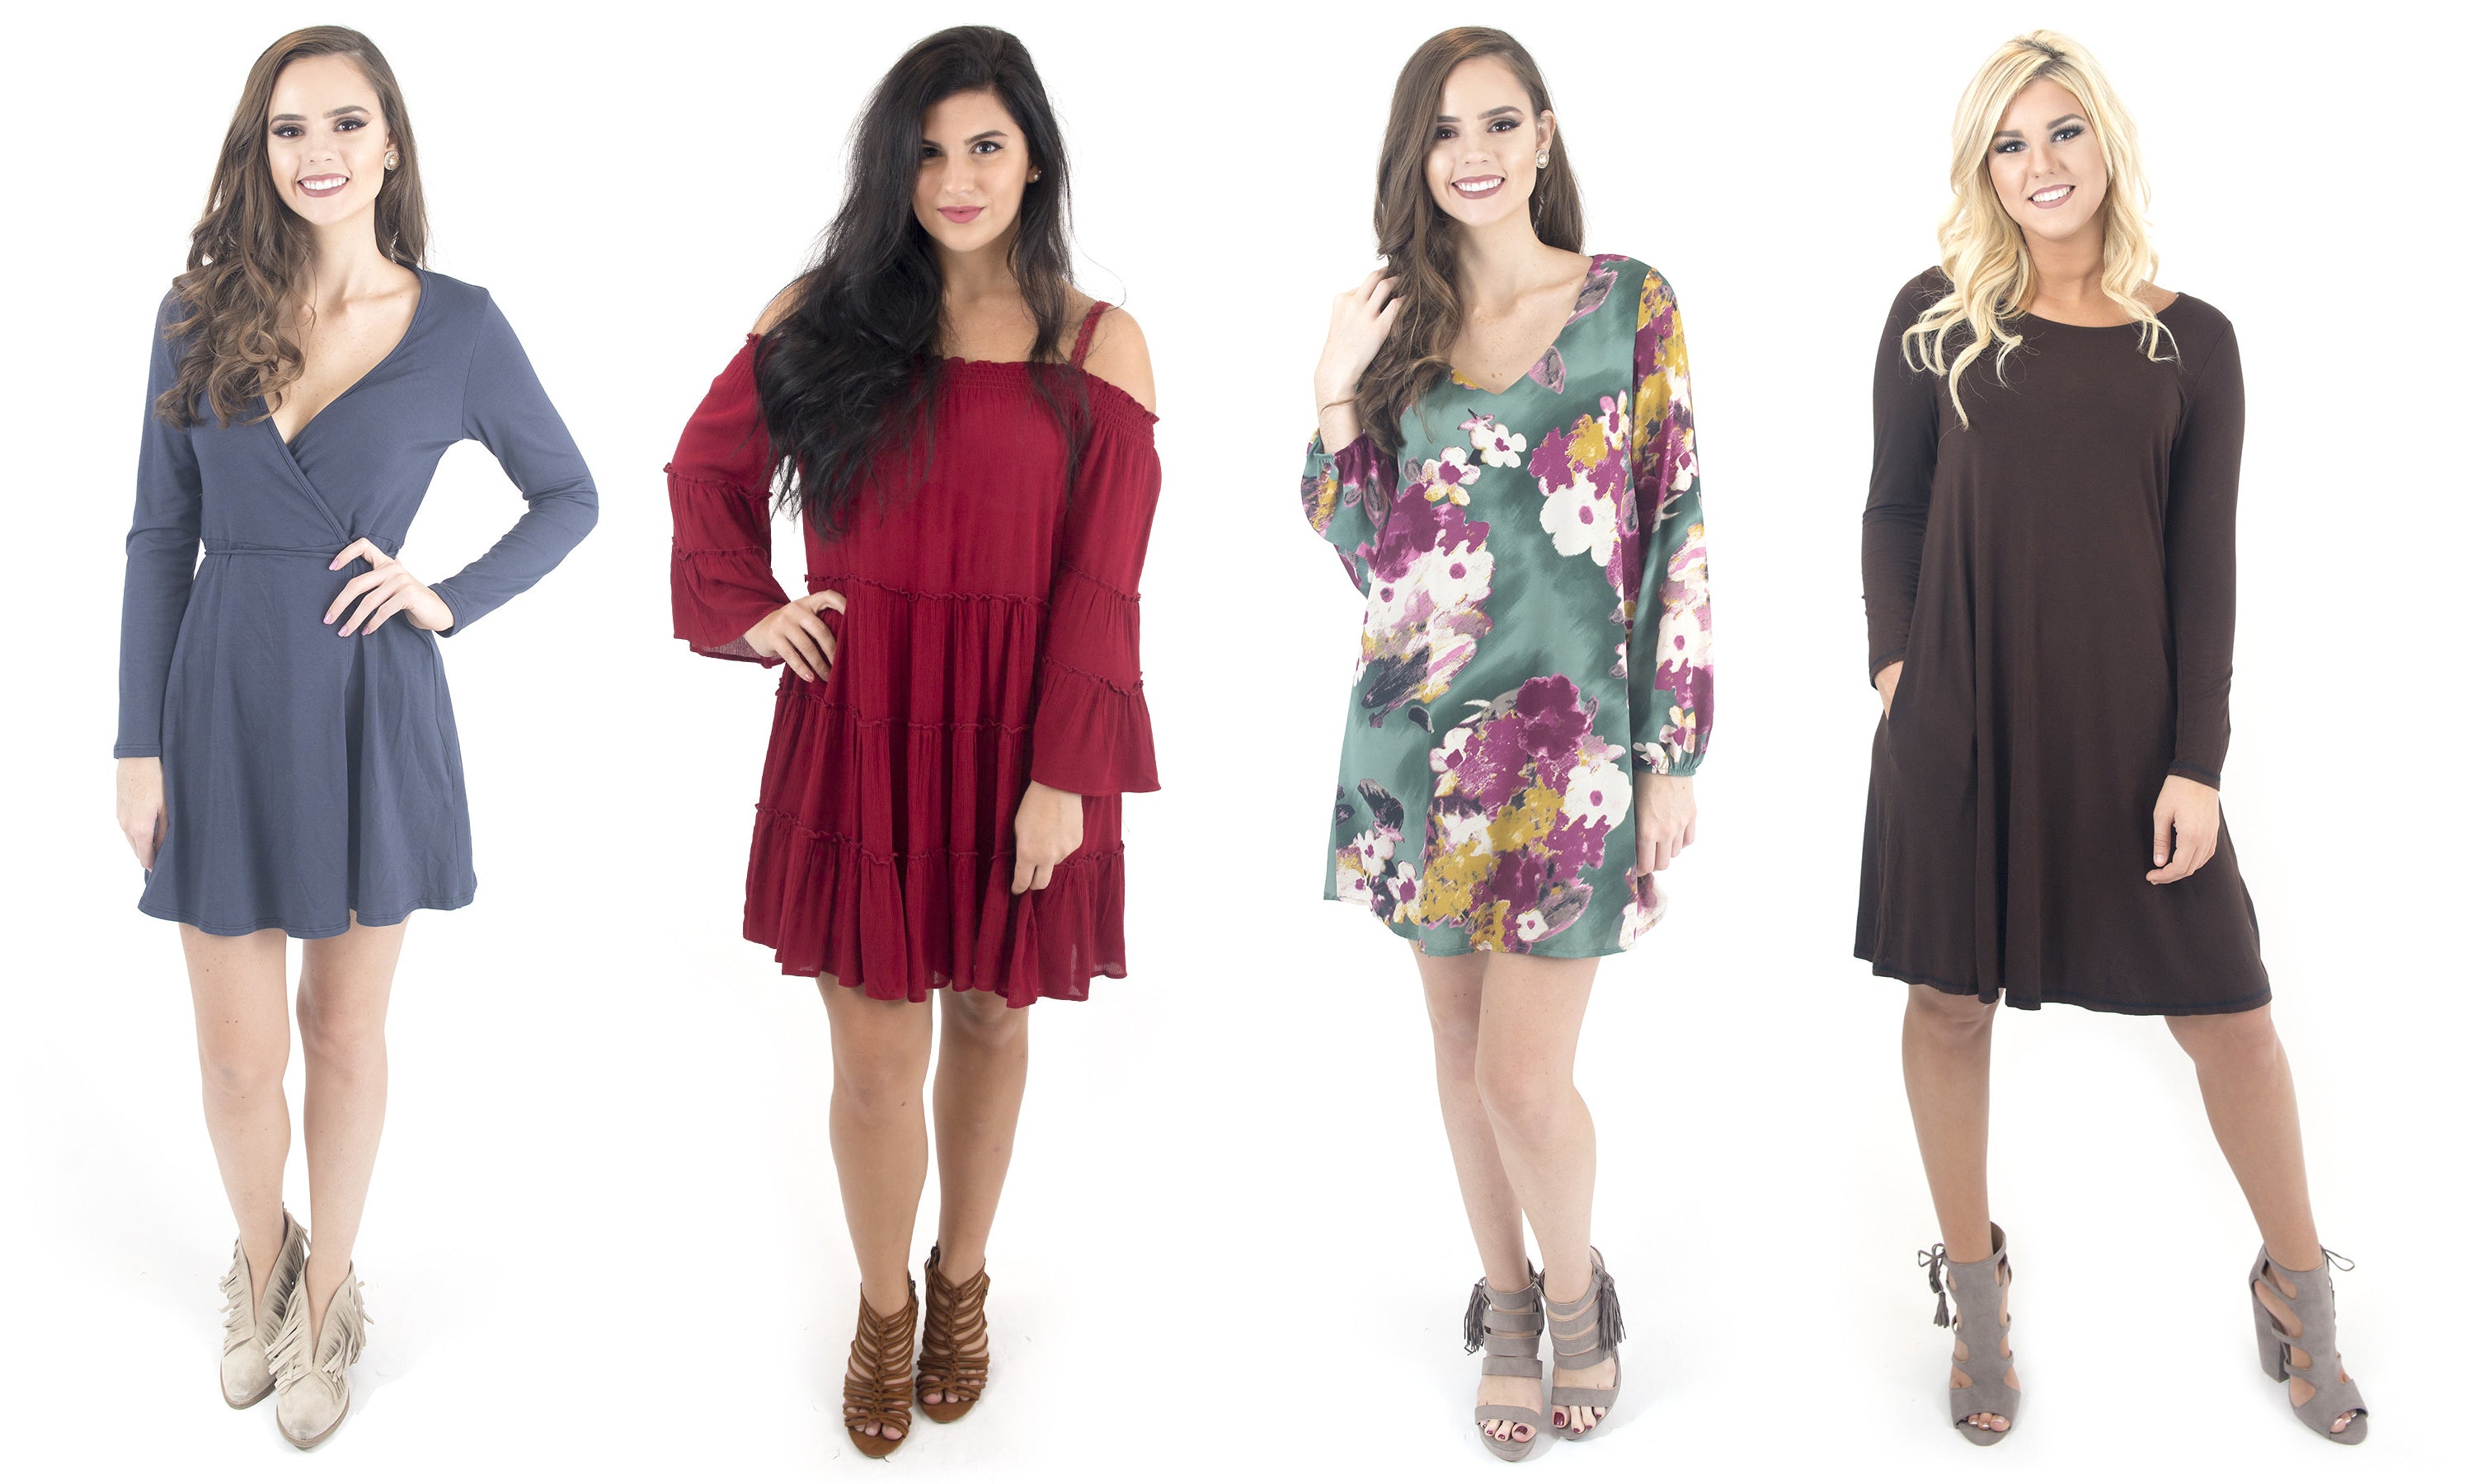 Get all dolled up for thanksgiving at Eccentrics Boutique